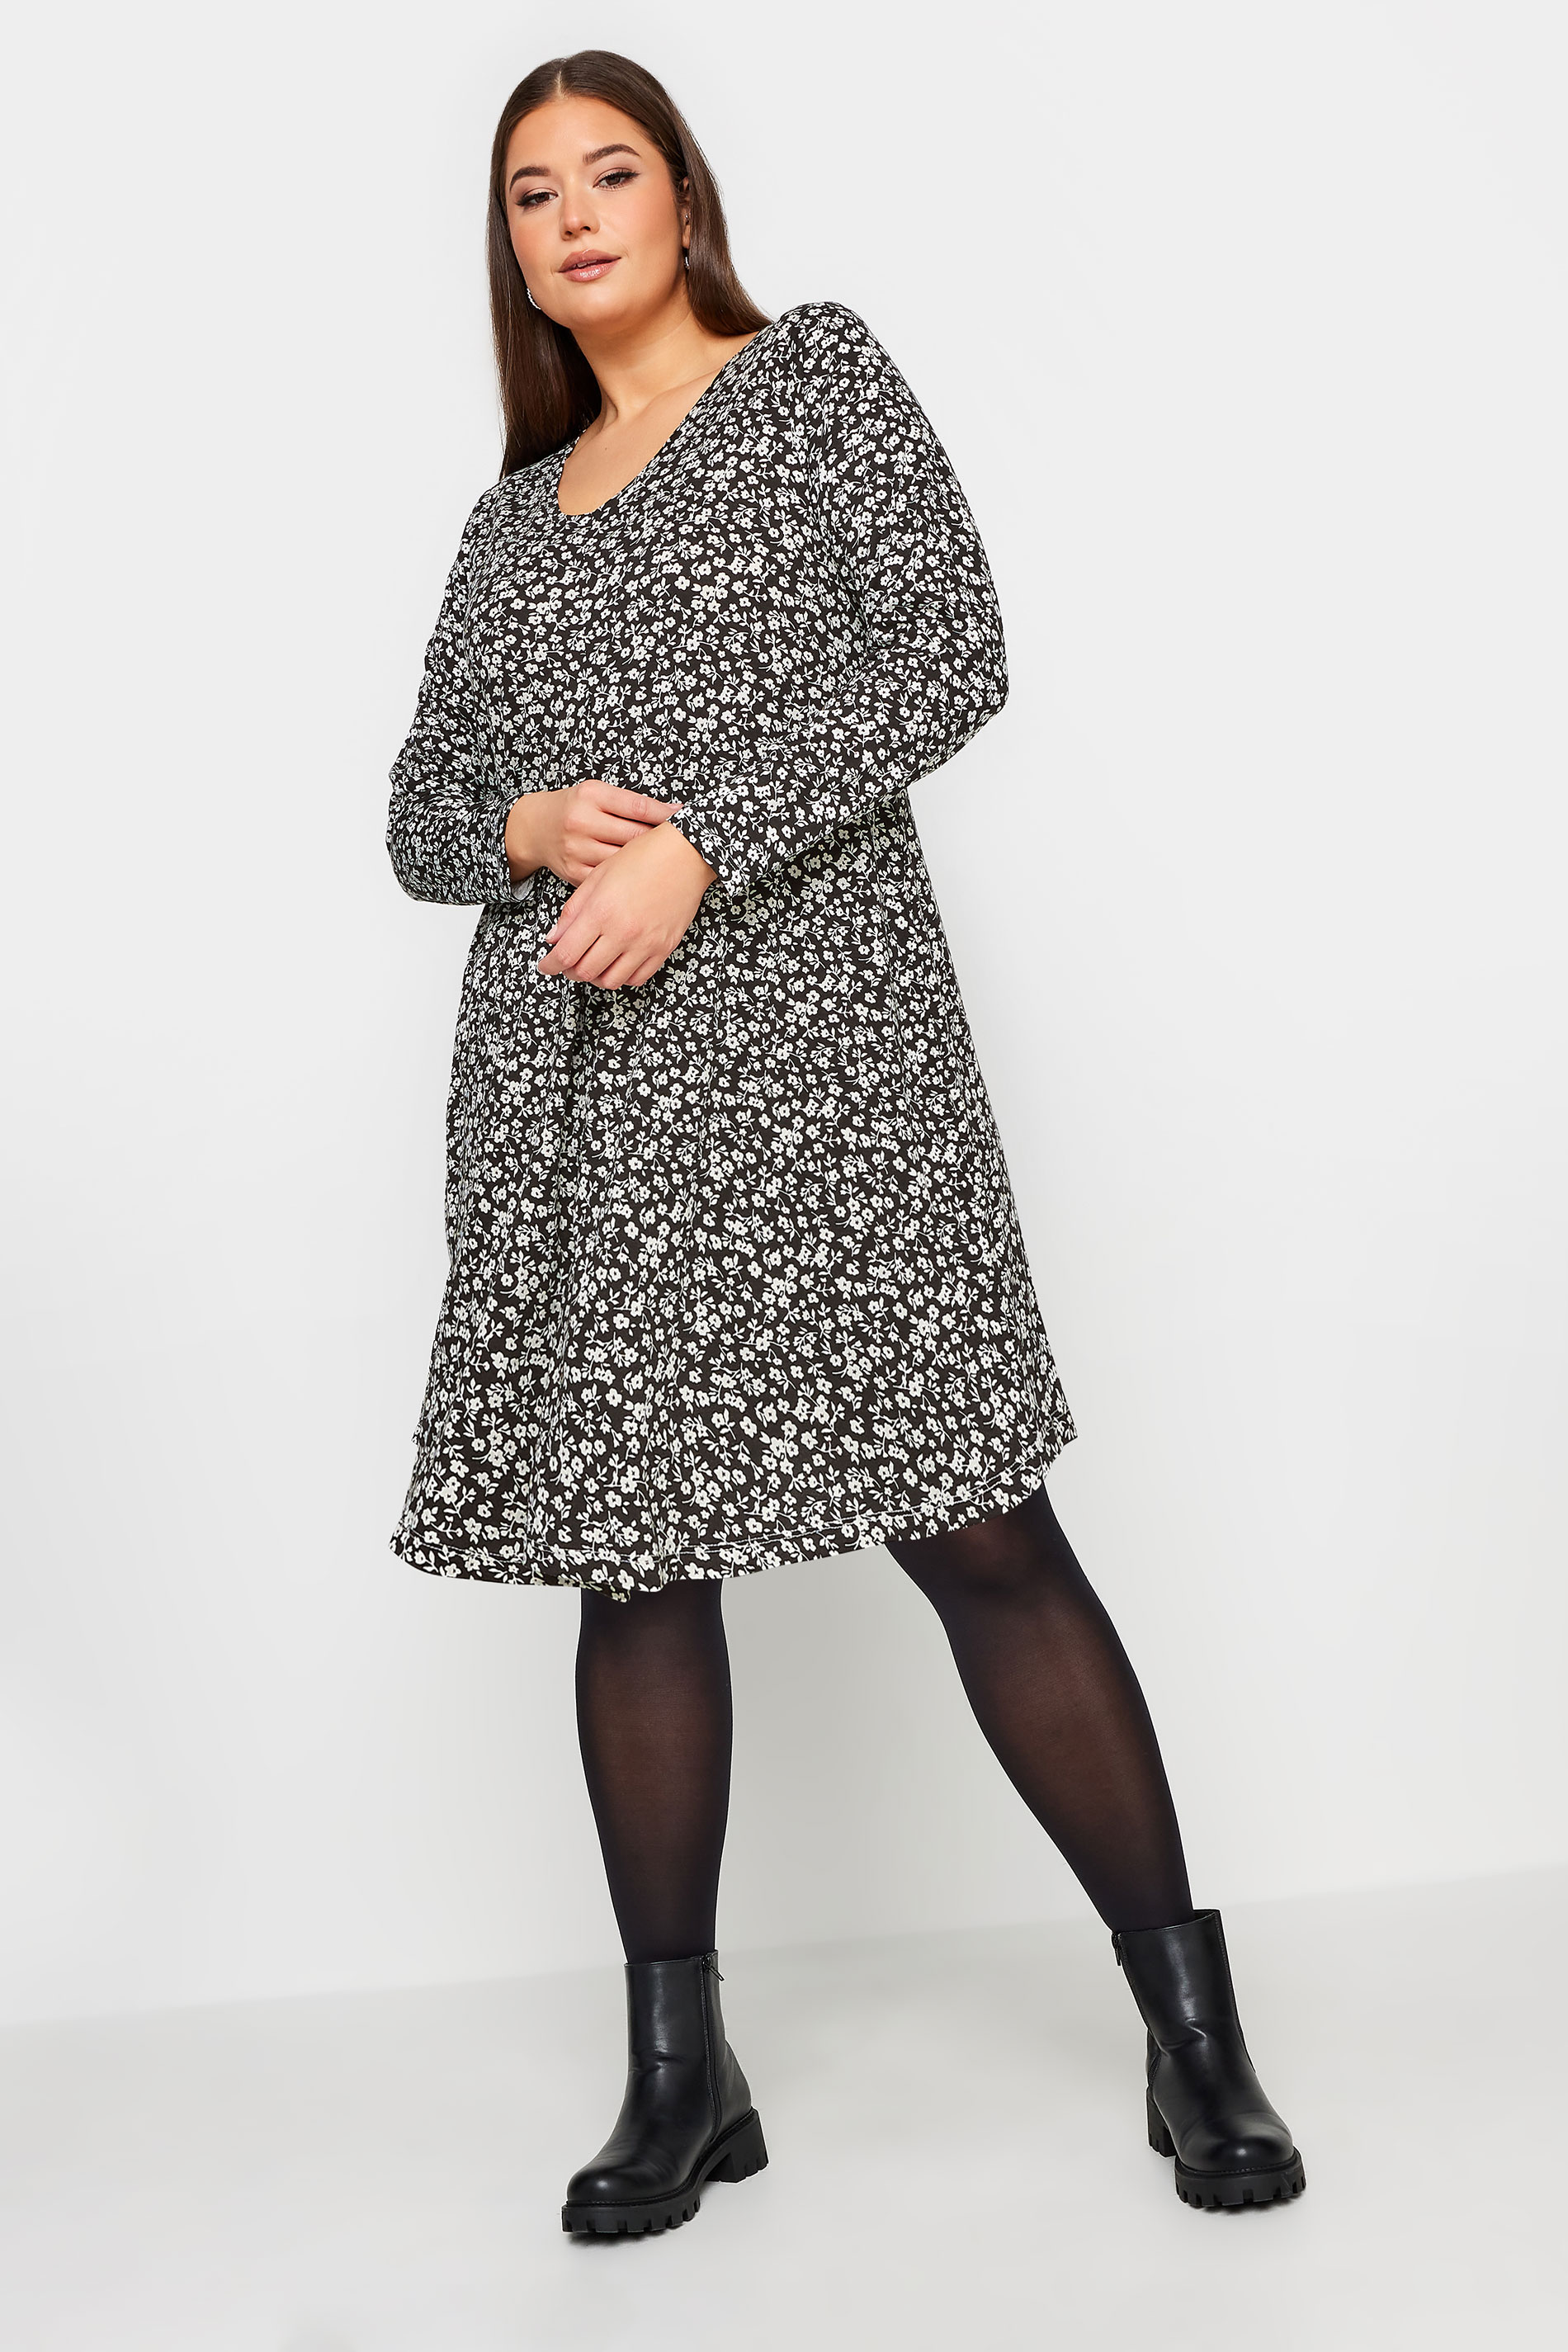 YOURS Plus Size Black & White Ditsy Floral Print Swing Dress | Yours Clothing 2